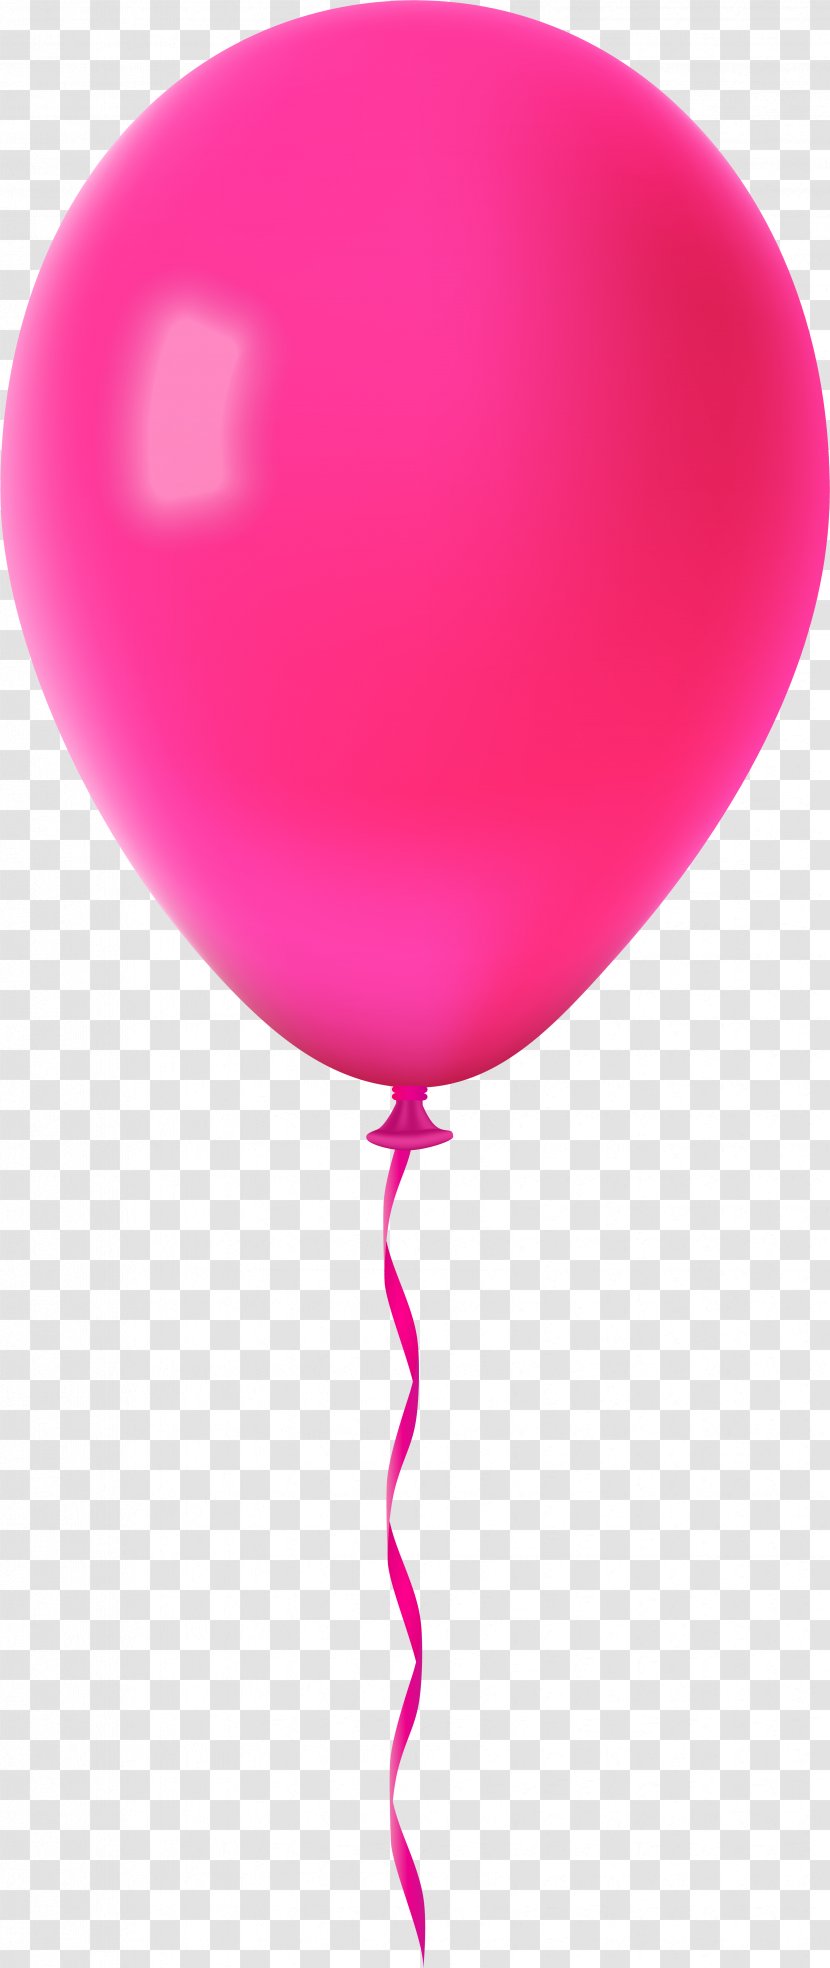 Pink Birthday Balloons Clip Art Image - Heart - Mangle Ucn Transparent PNG